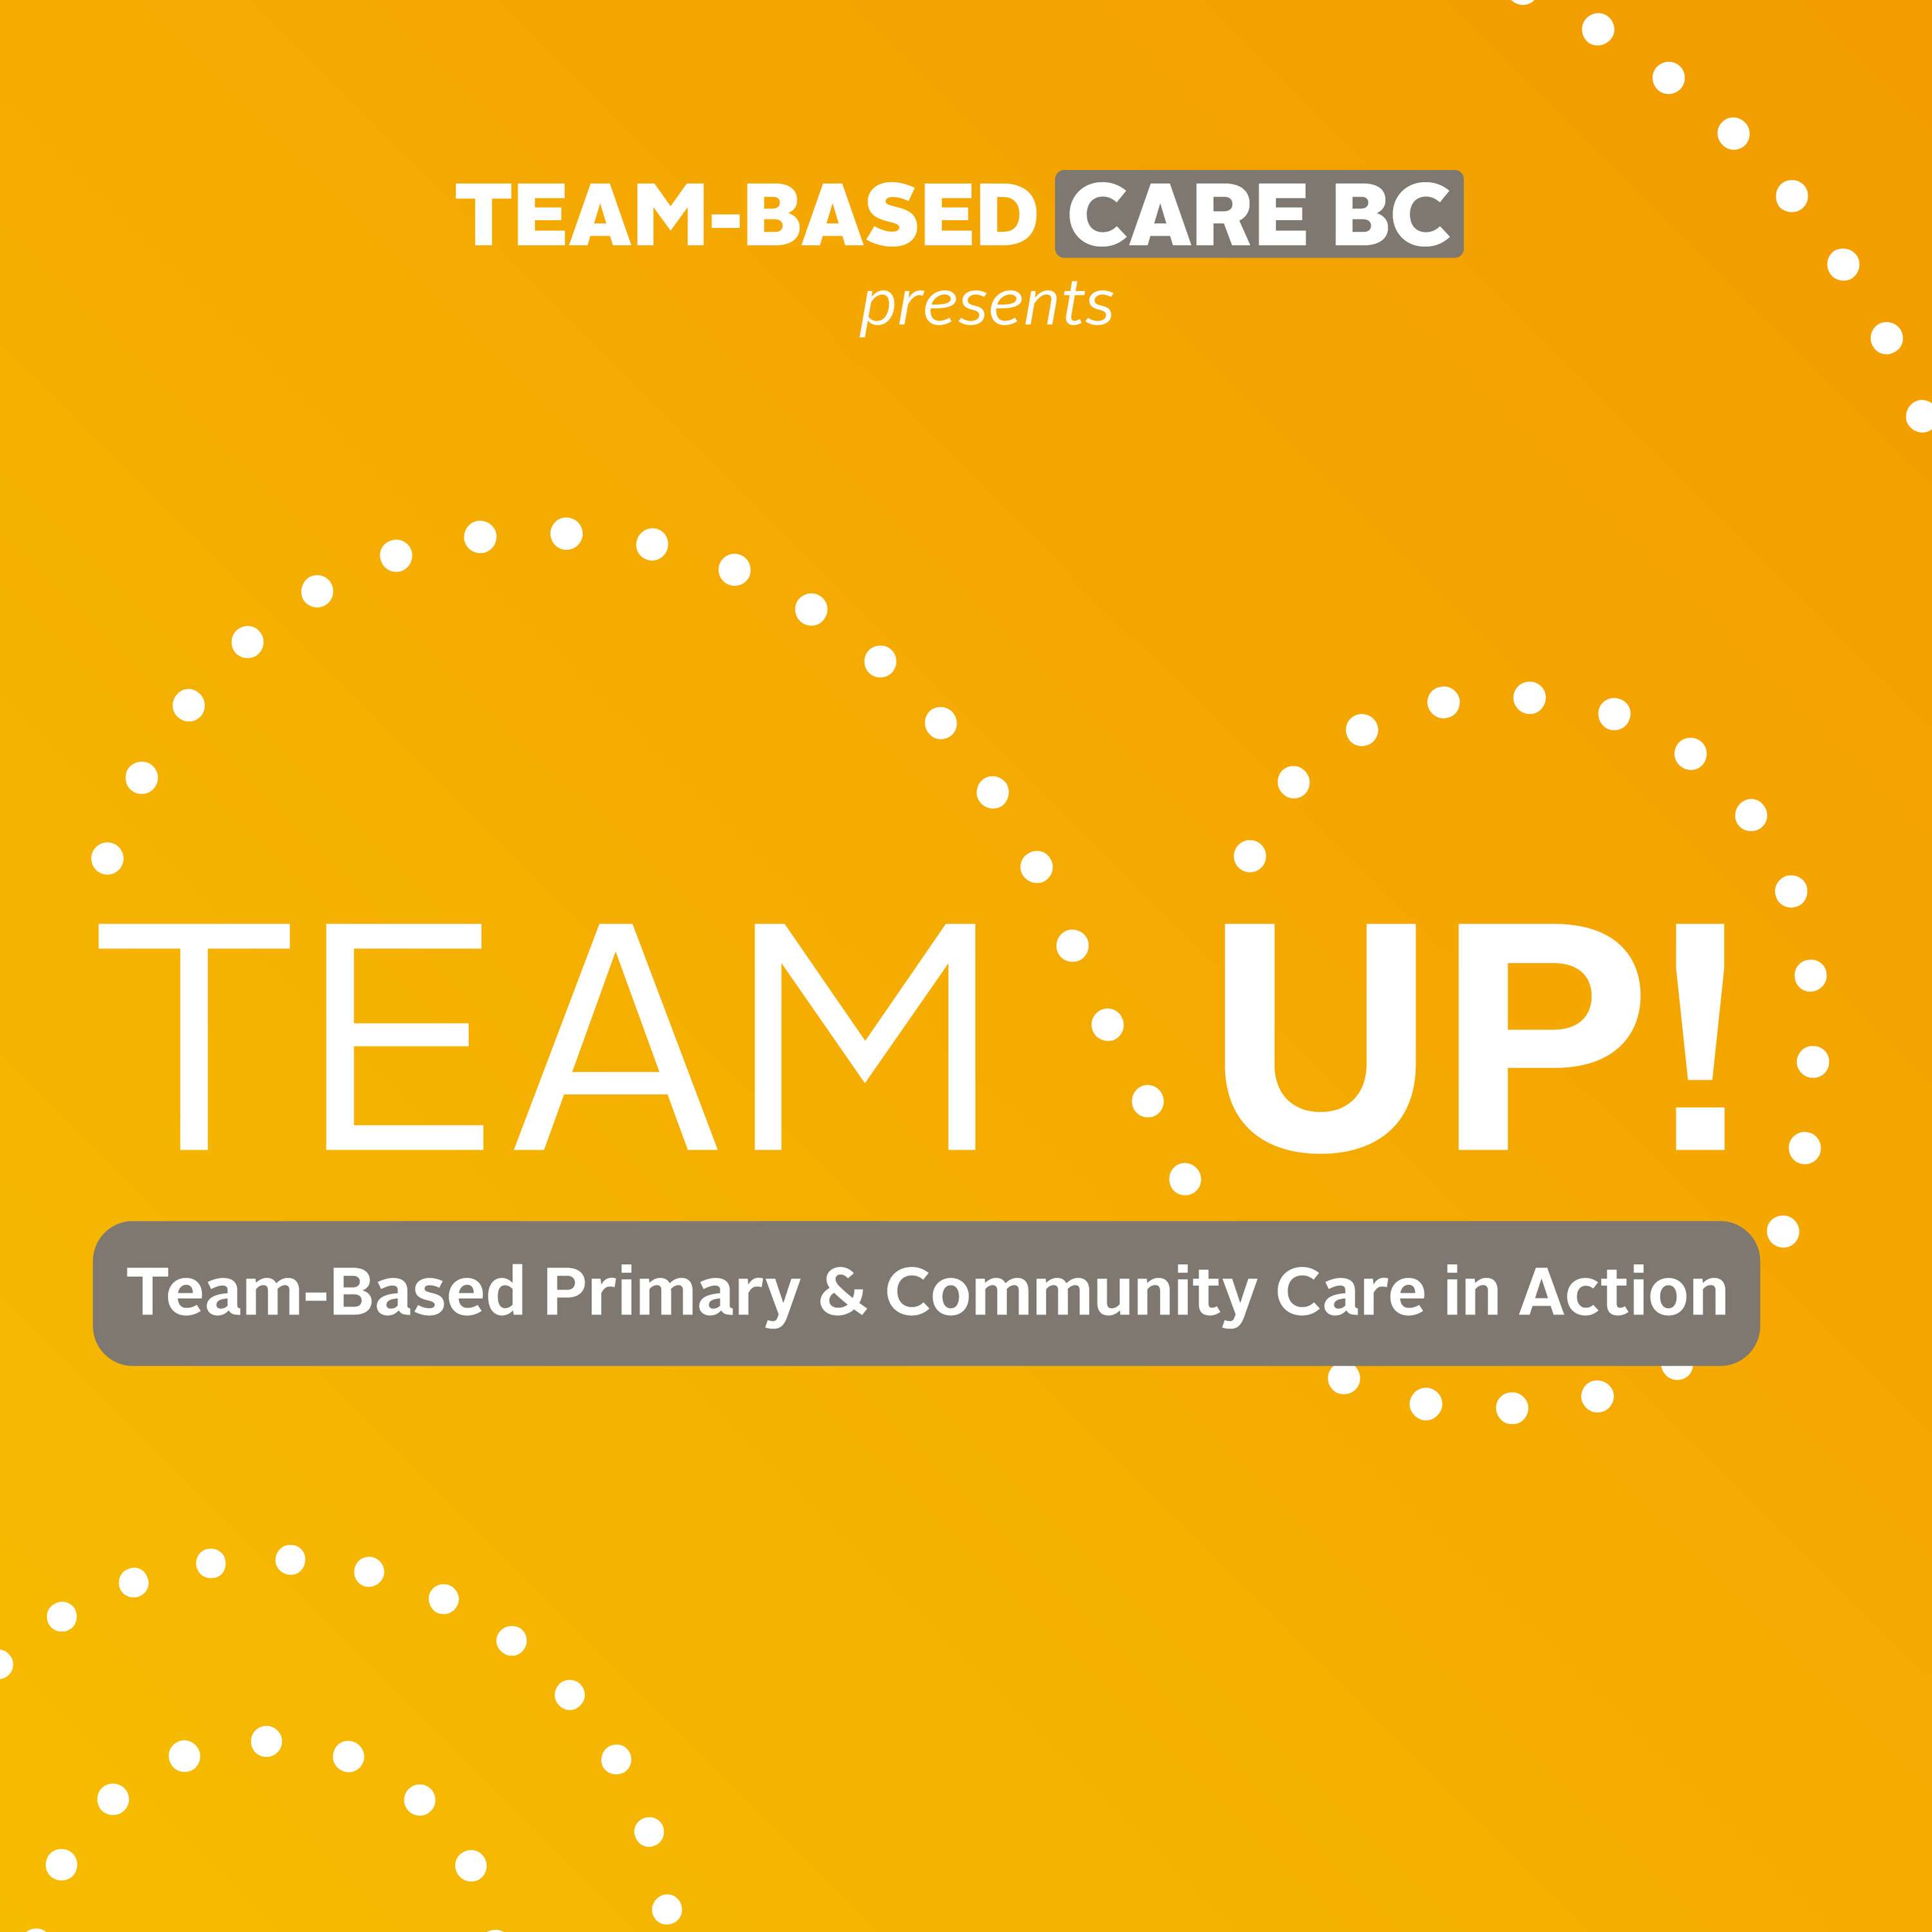 Team Up! Team-based primary and community care in action